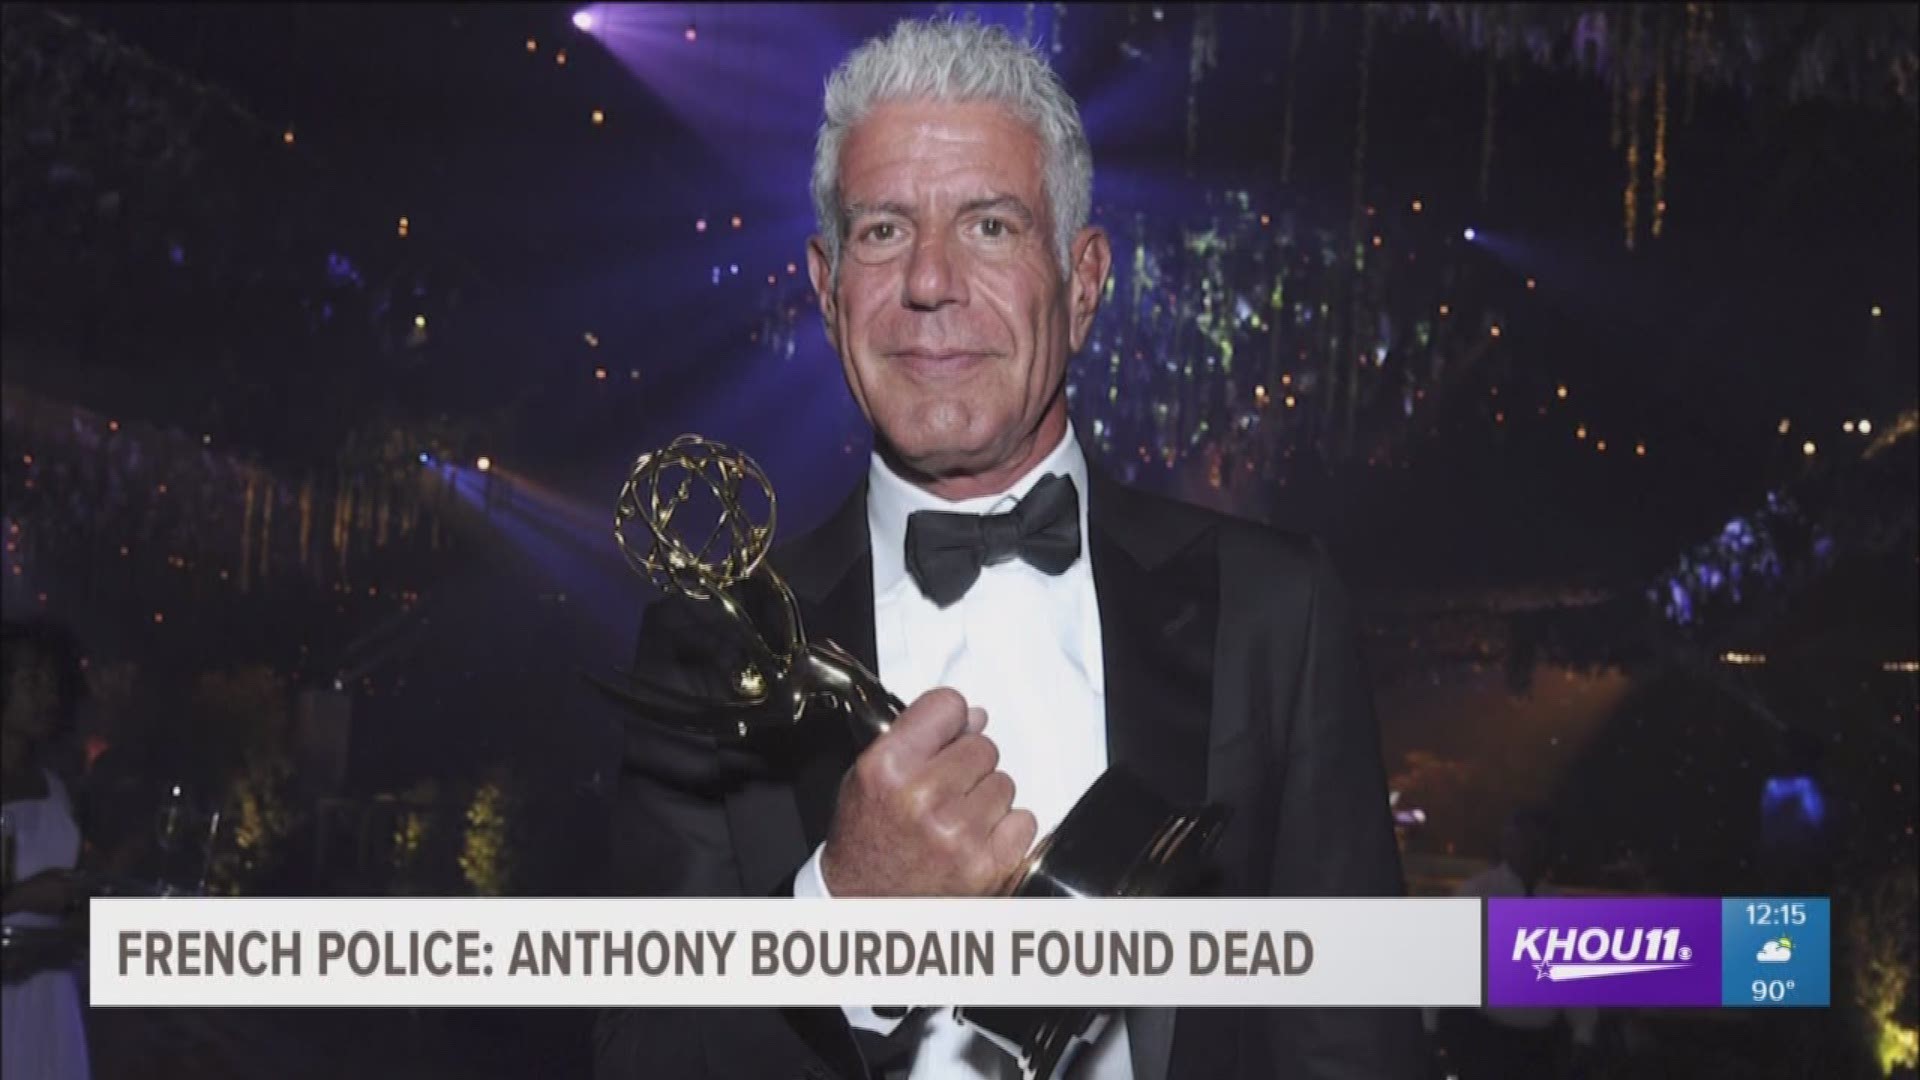 Anthony Bourdain of CNN's "Parts Unknown" is dead, the broadcast company reports. "The chef, storyteller and Emmy-winning host has committed suicide at age 61," CNN tweeted Friday morning. CNN said the TV host was found unresponsive by friend and chef Er